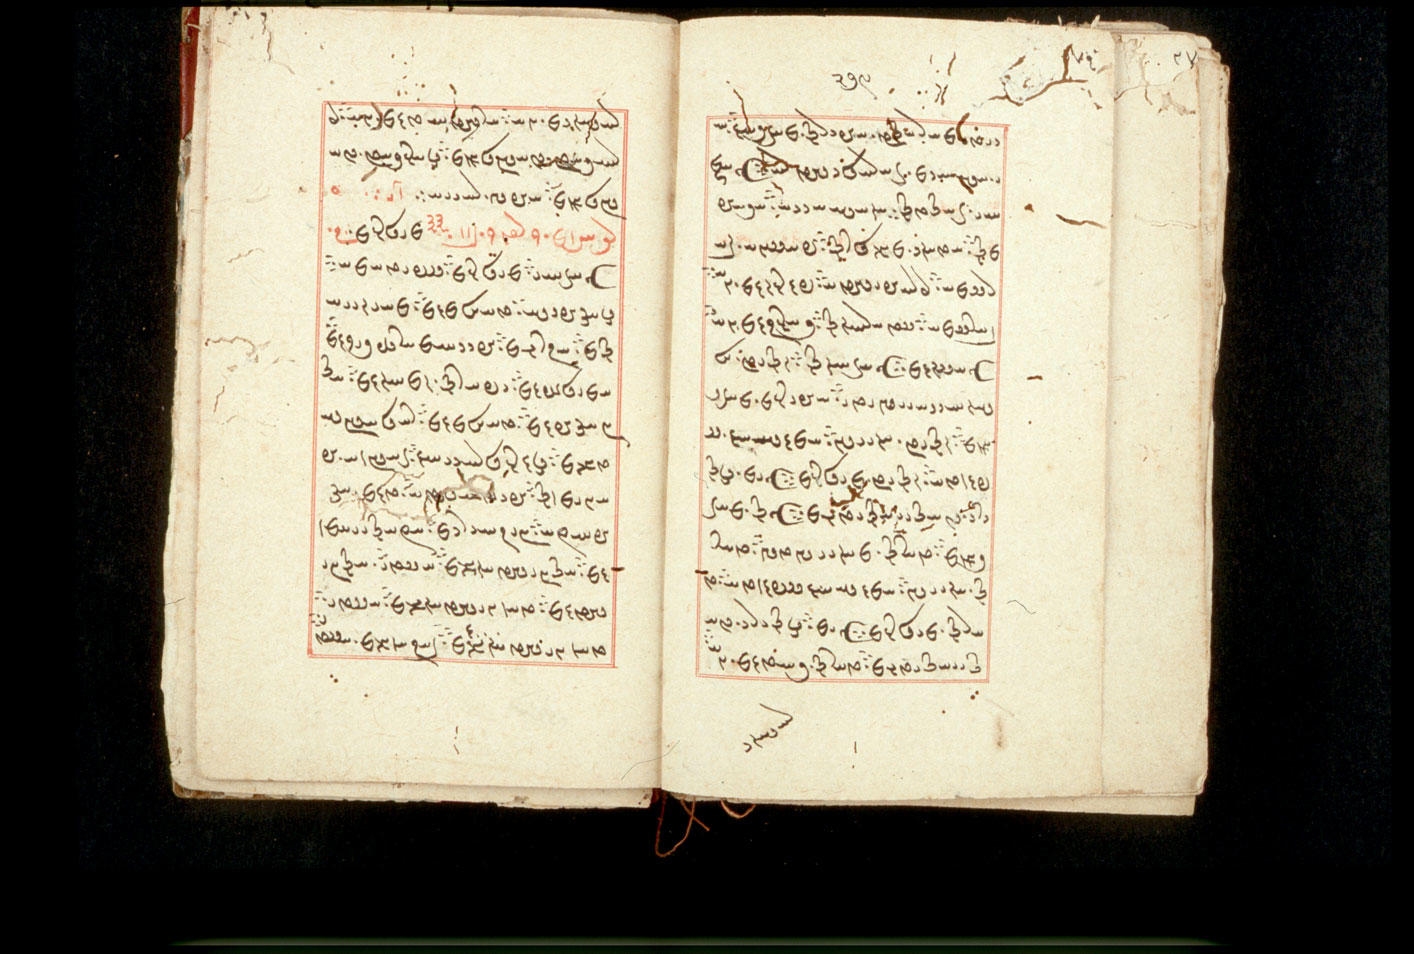 Folios 279v (right) and 280r (left)